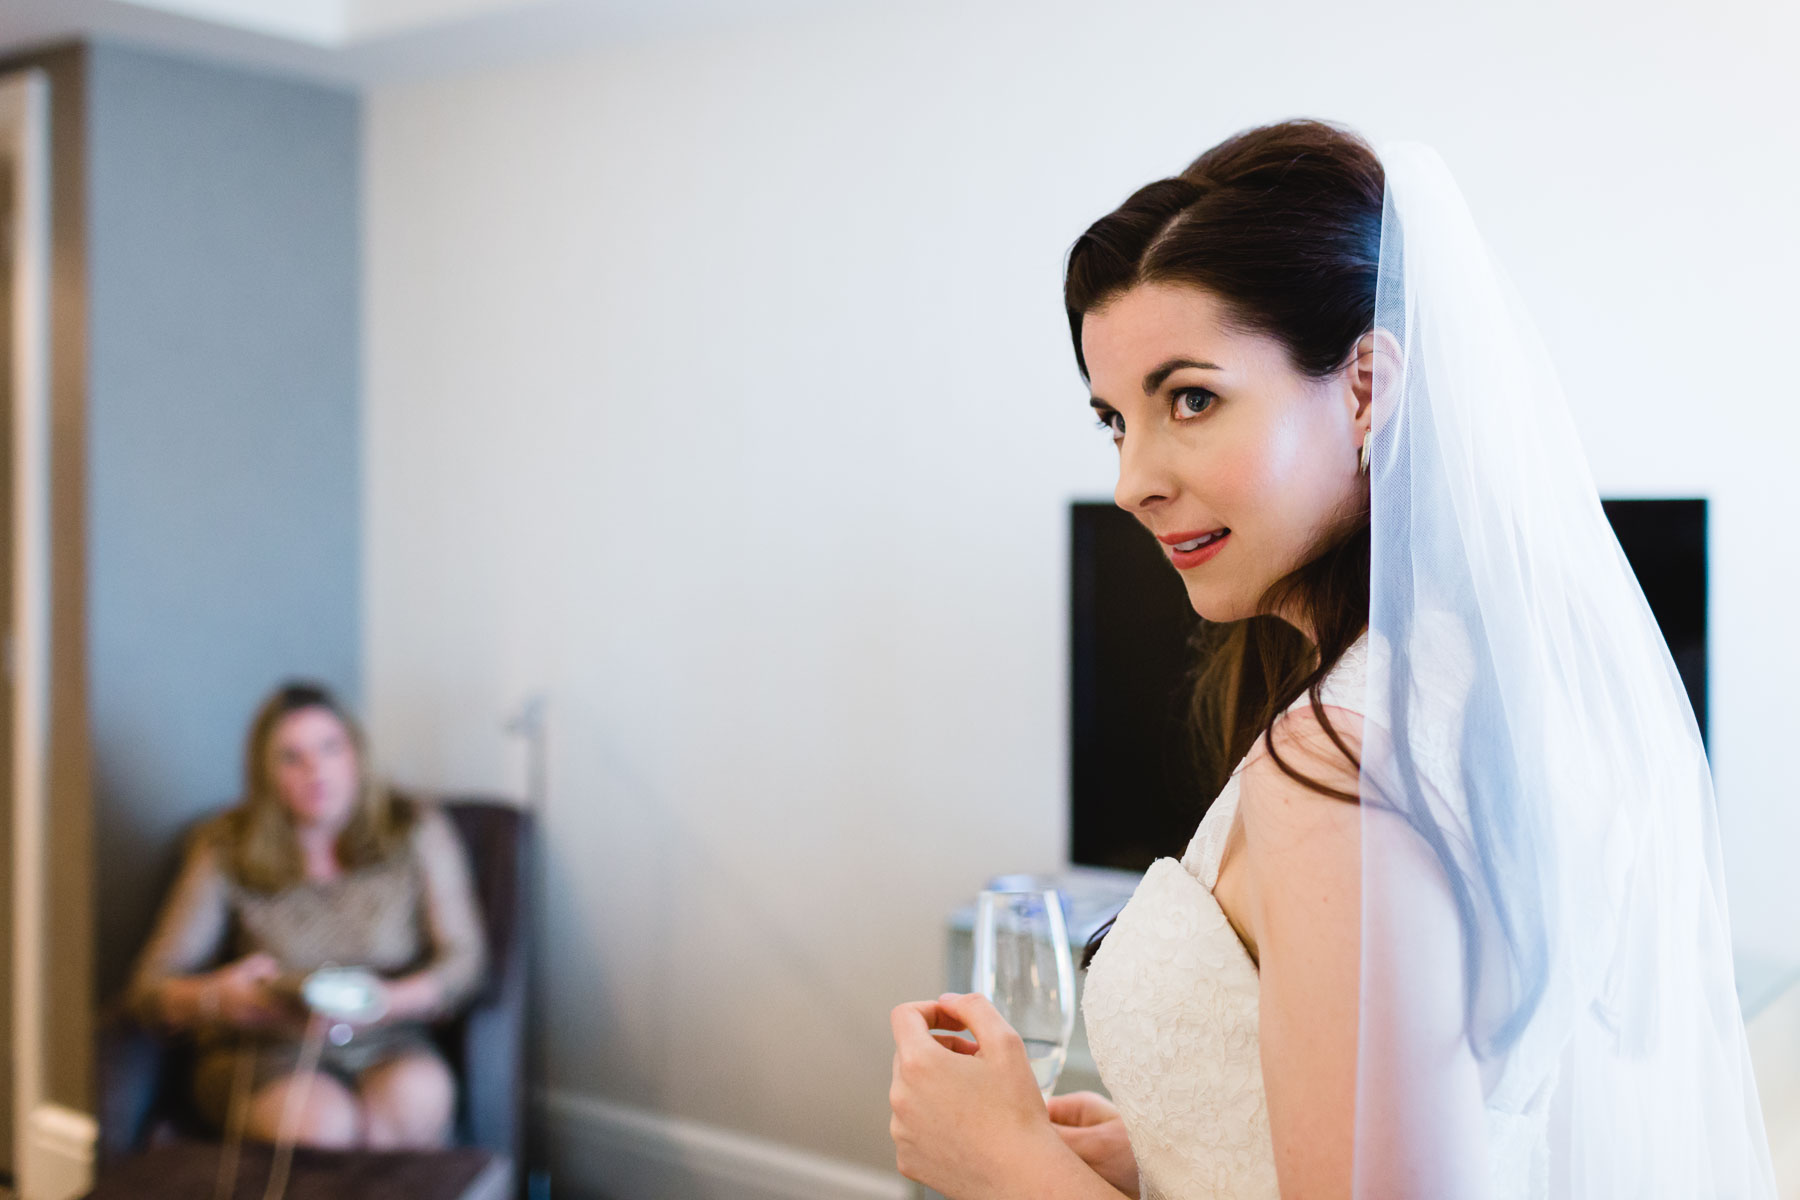 The bride looks left while holding a flute of sparkling wine in this photo from the Trump Hotel.